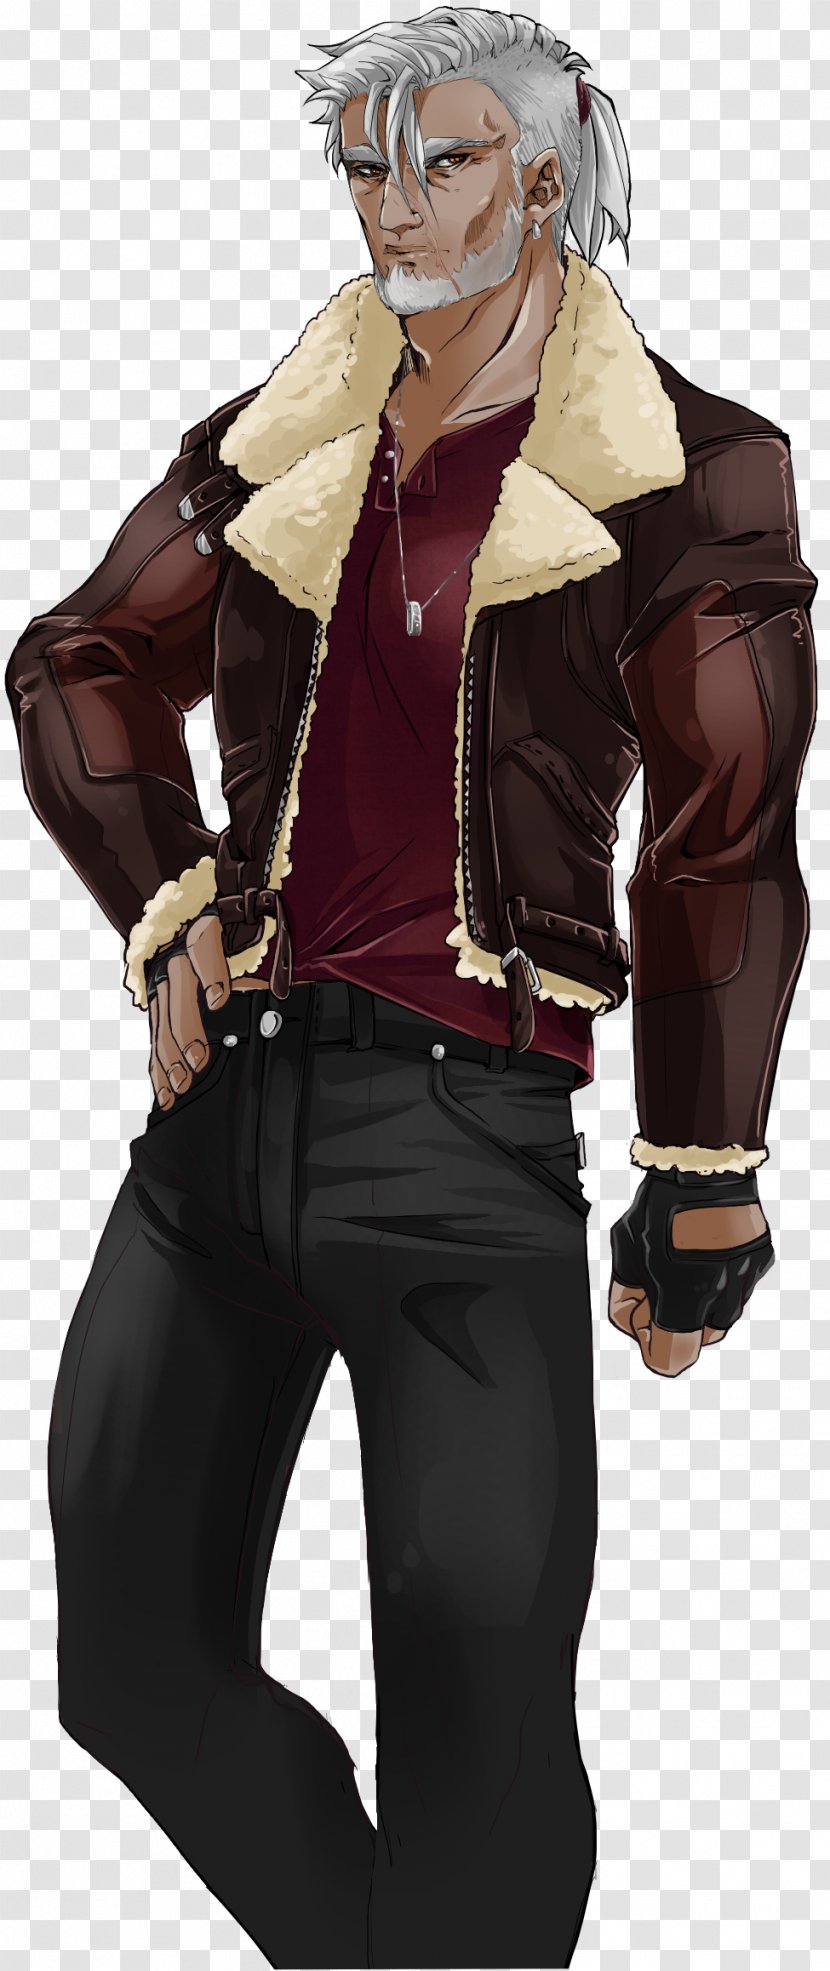 Costume Design Character Fiction - Sugar Daddy Transparent PNG